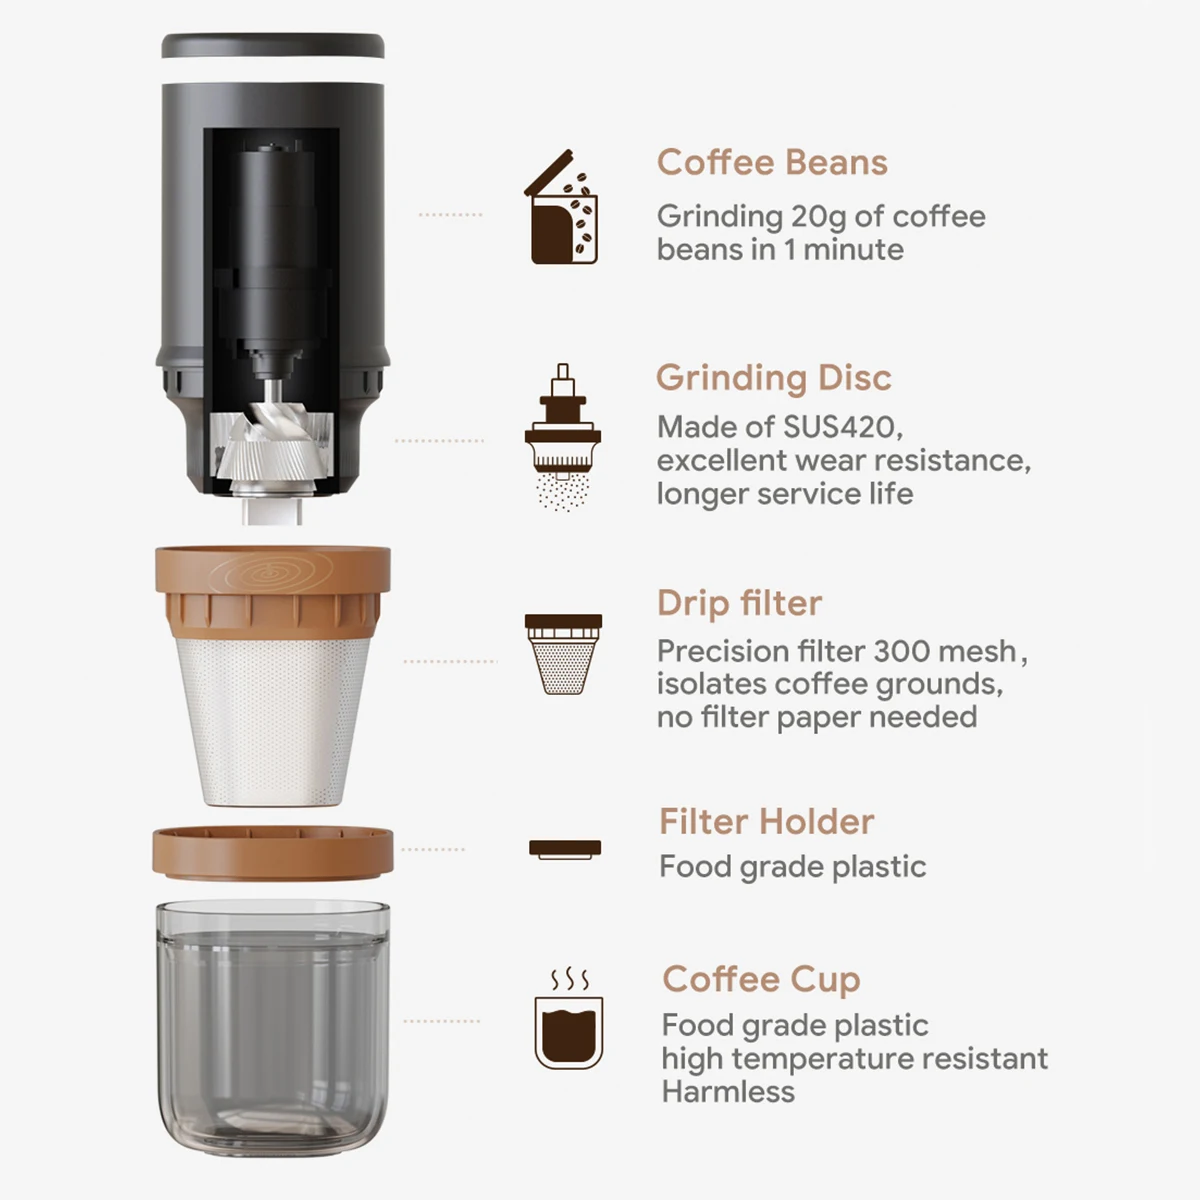 https://ae01.alicdn.com/kf/Sc132a54e3bba414d8c59ee4541a05351H/iCafilas-Electric-Coffee-Grinder-All-in-One-Portable-Coffee-Maker-Dripper-with-TYPE-C-Rechargeable-Adjustable.jpg